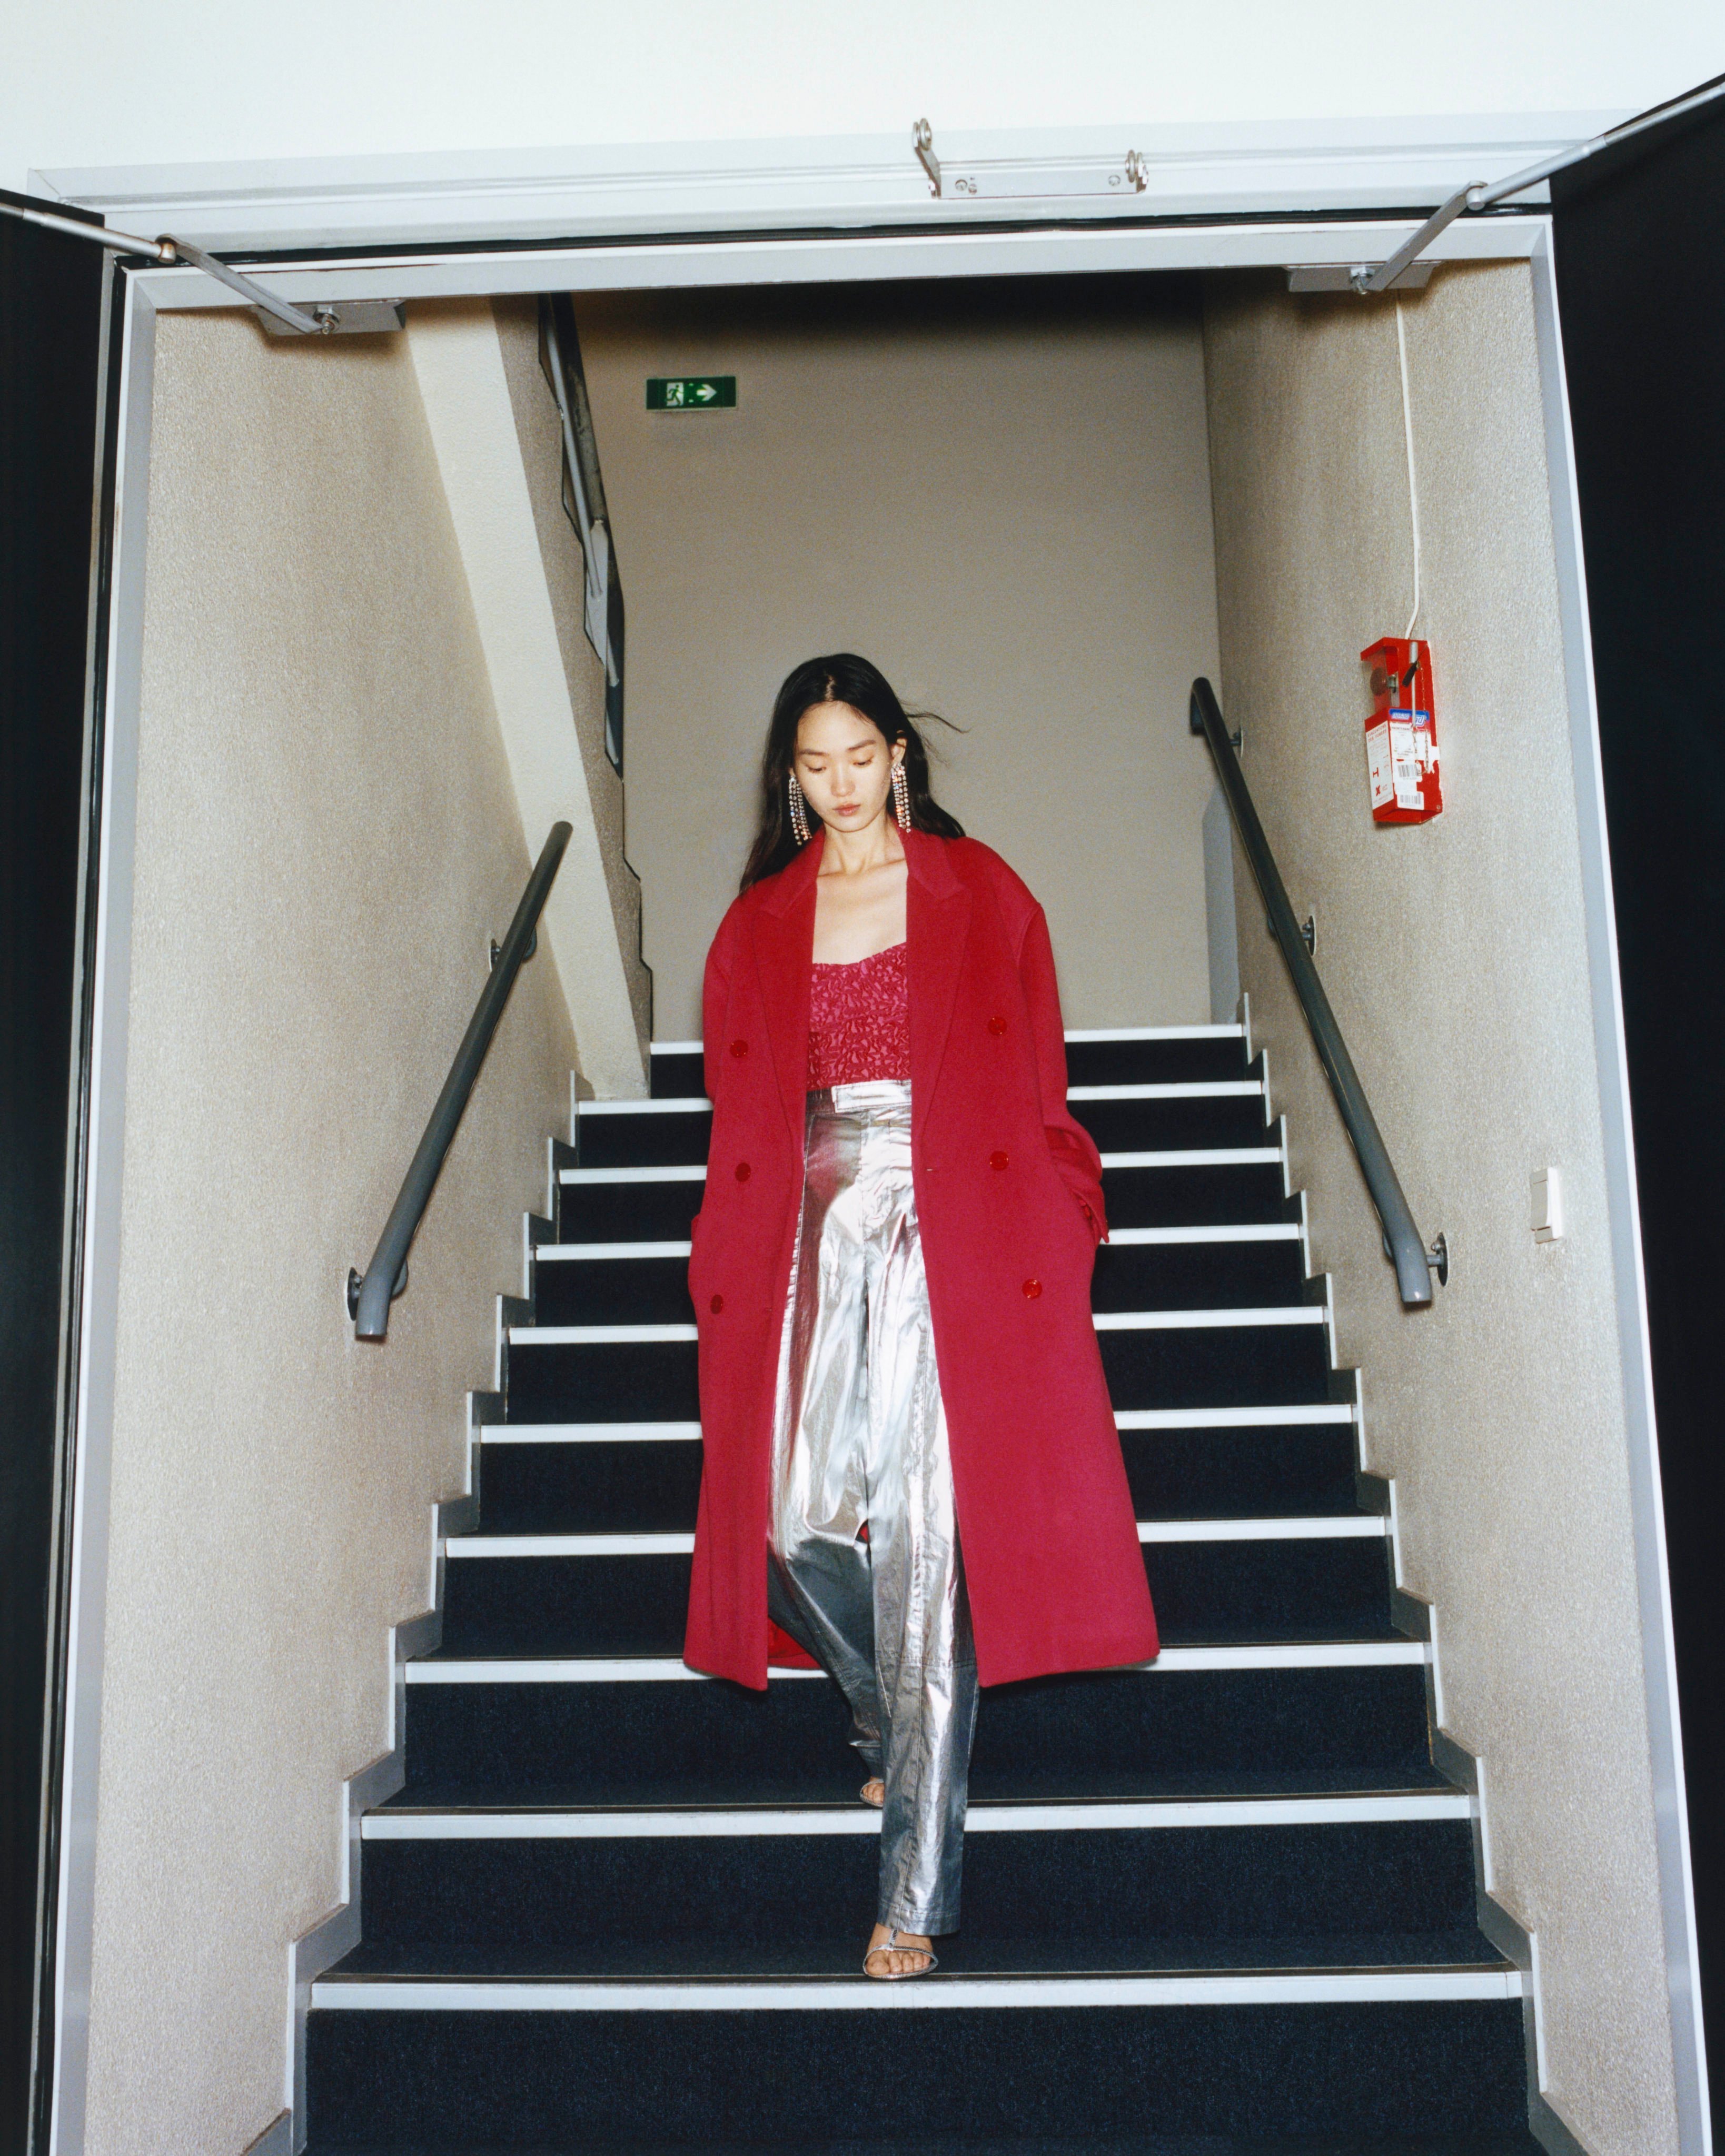 Silver trousers have made a triumphal return for the first time since the 90s, with Dior, Sacai, Simone Rocha, Rotate Birger Christensen, Isabel Marant (pictured) – as well as Madonna and Beyoncé – hopping on the trend. Photos: Handouts